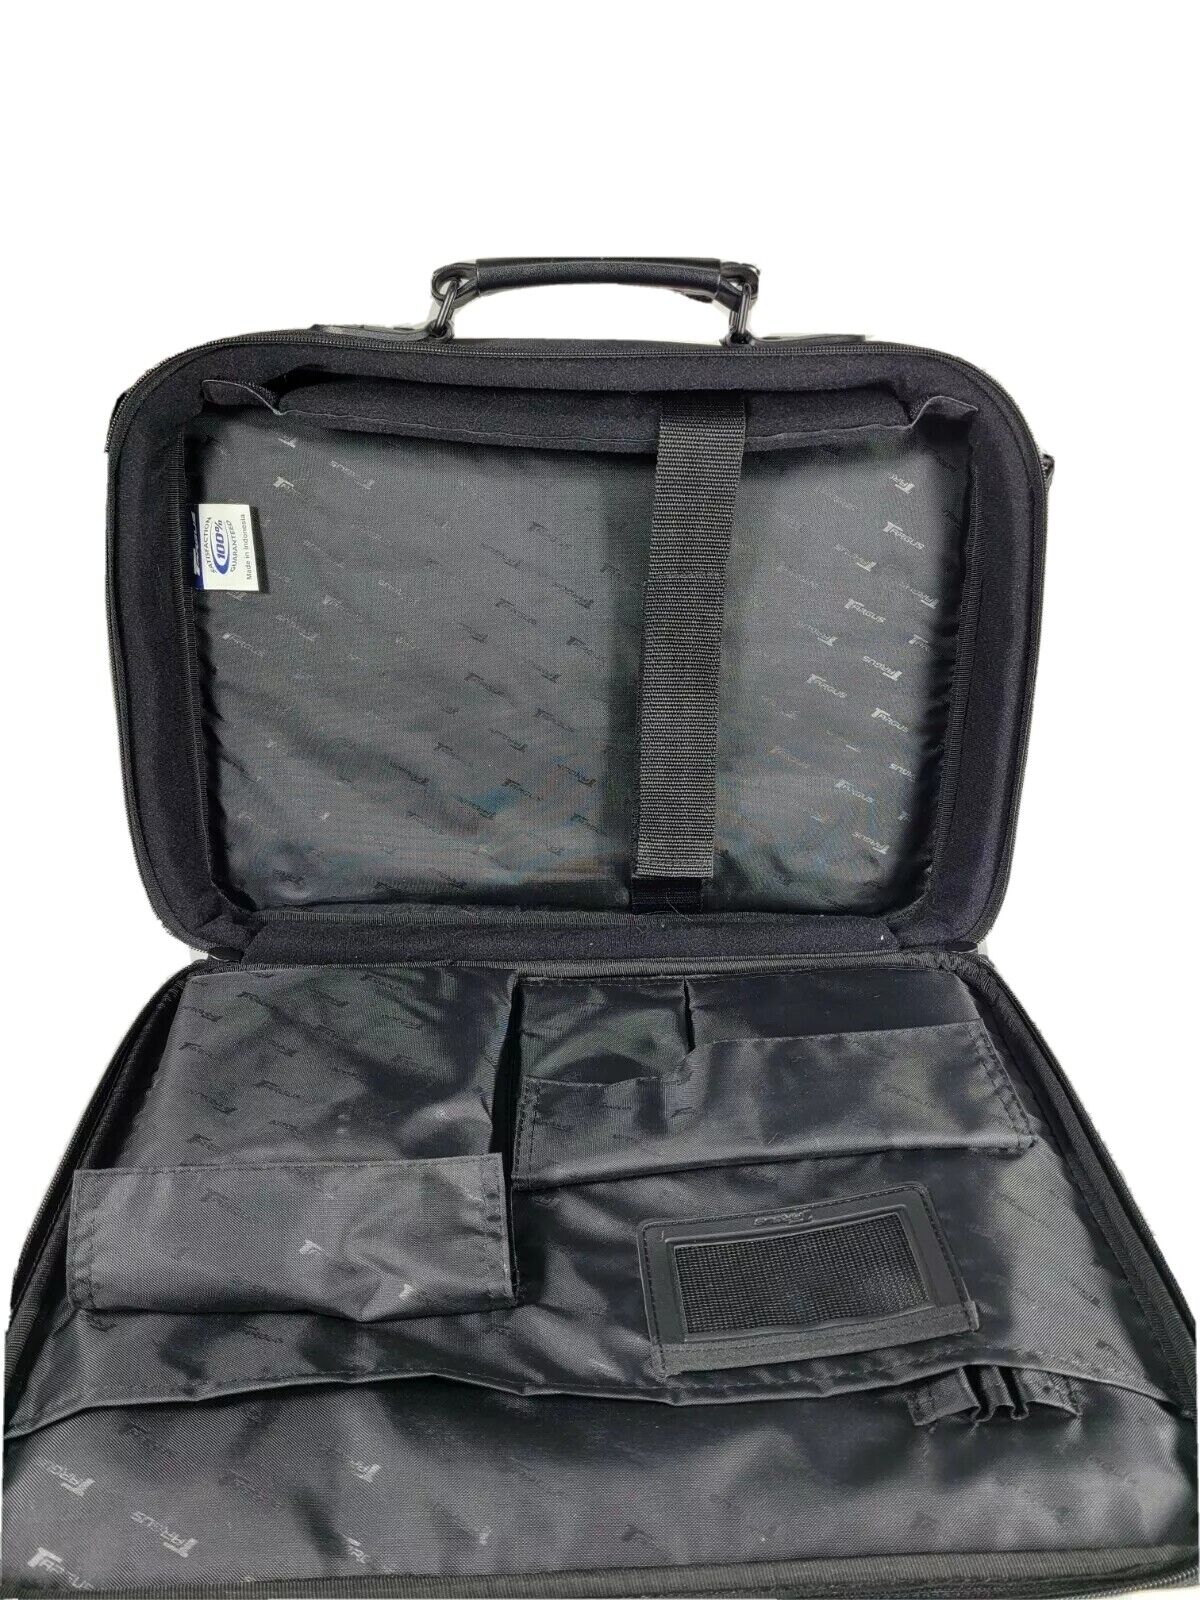 Targus Padded Carry-on Laptop Computer Travel Camera Accessory Book Bag Case